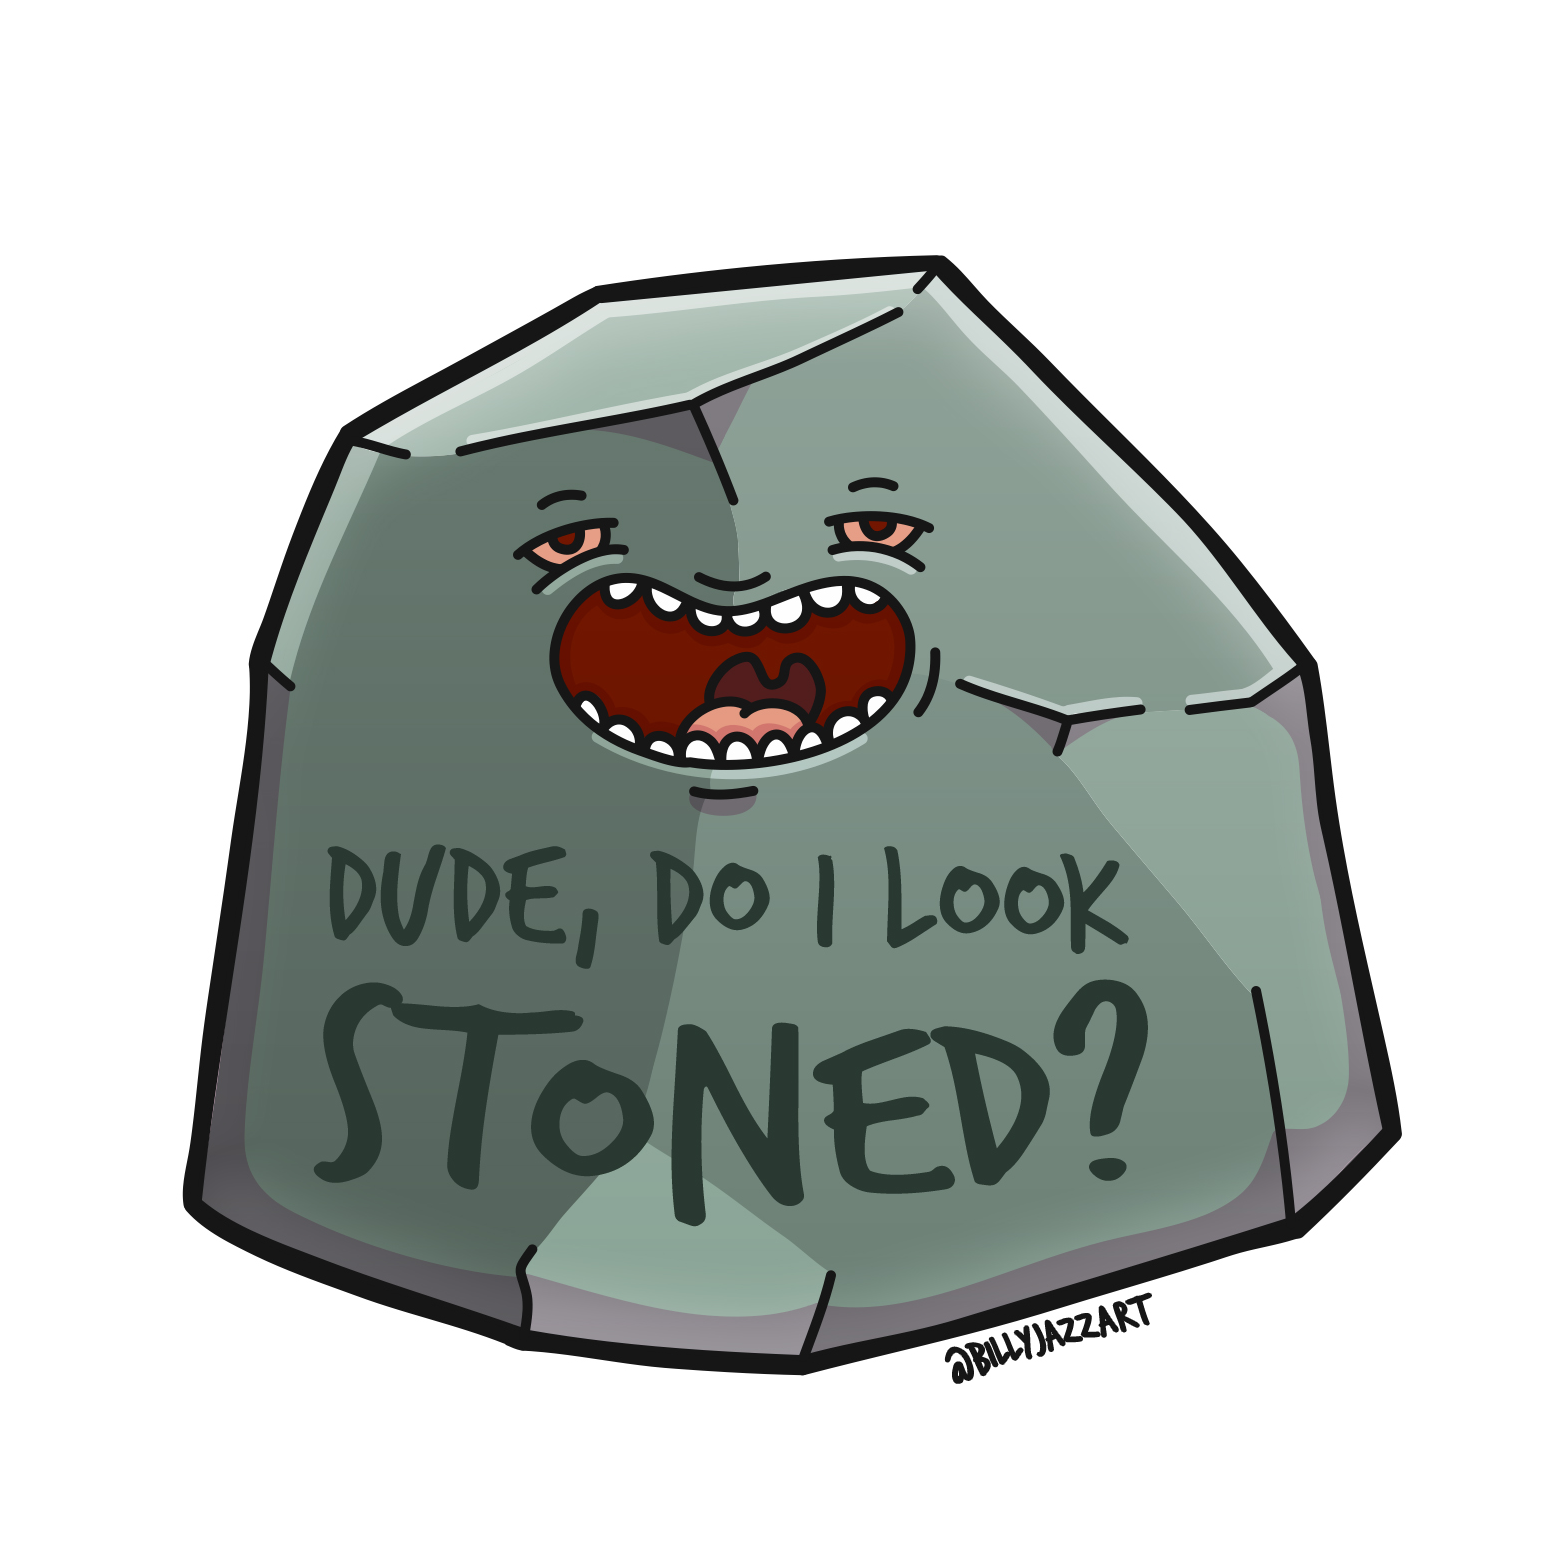 sticker_3_stoned.png